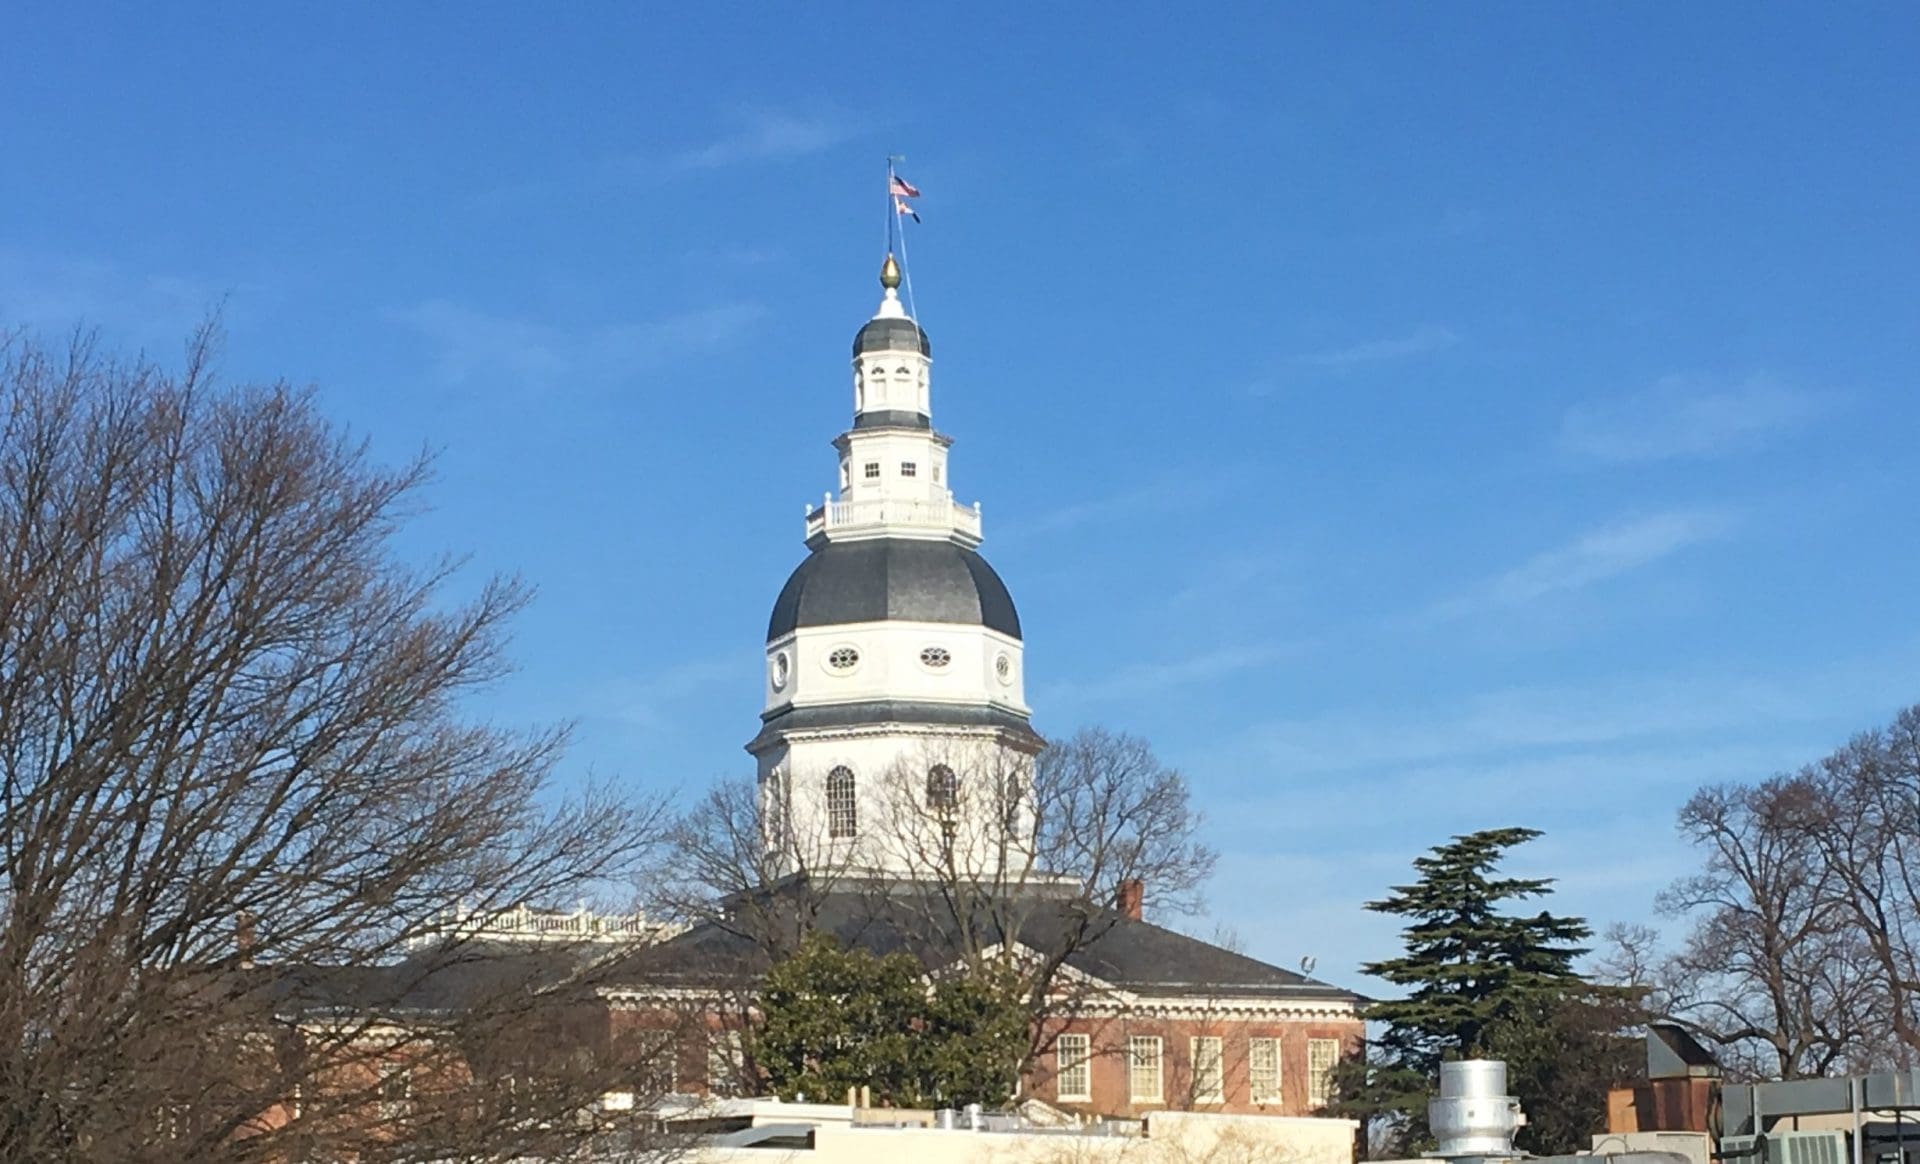 The State House in Annapolis (MarylandReporter.com file photo)